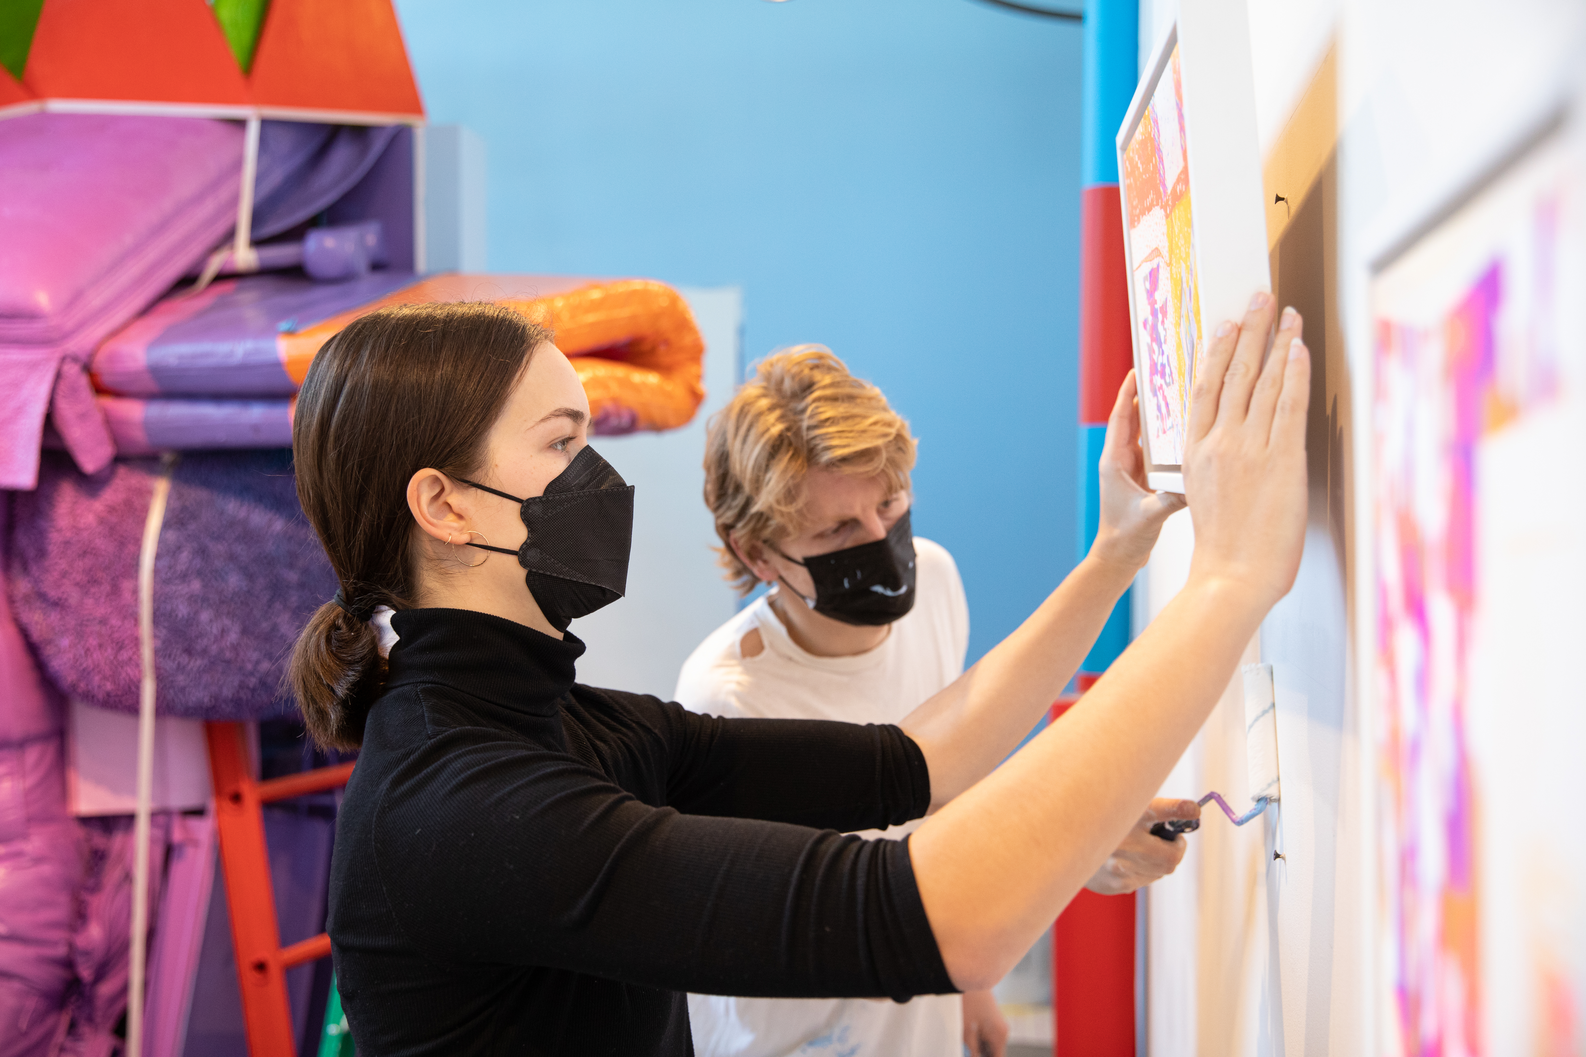 Two students wearing masks install artwork against colorful background